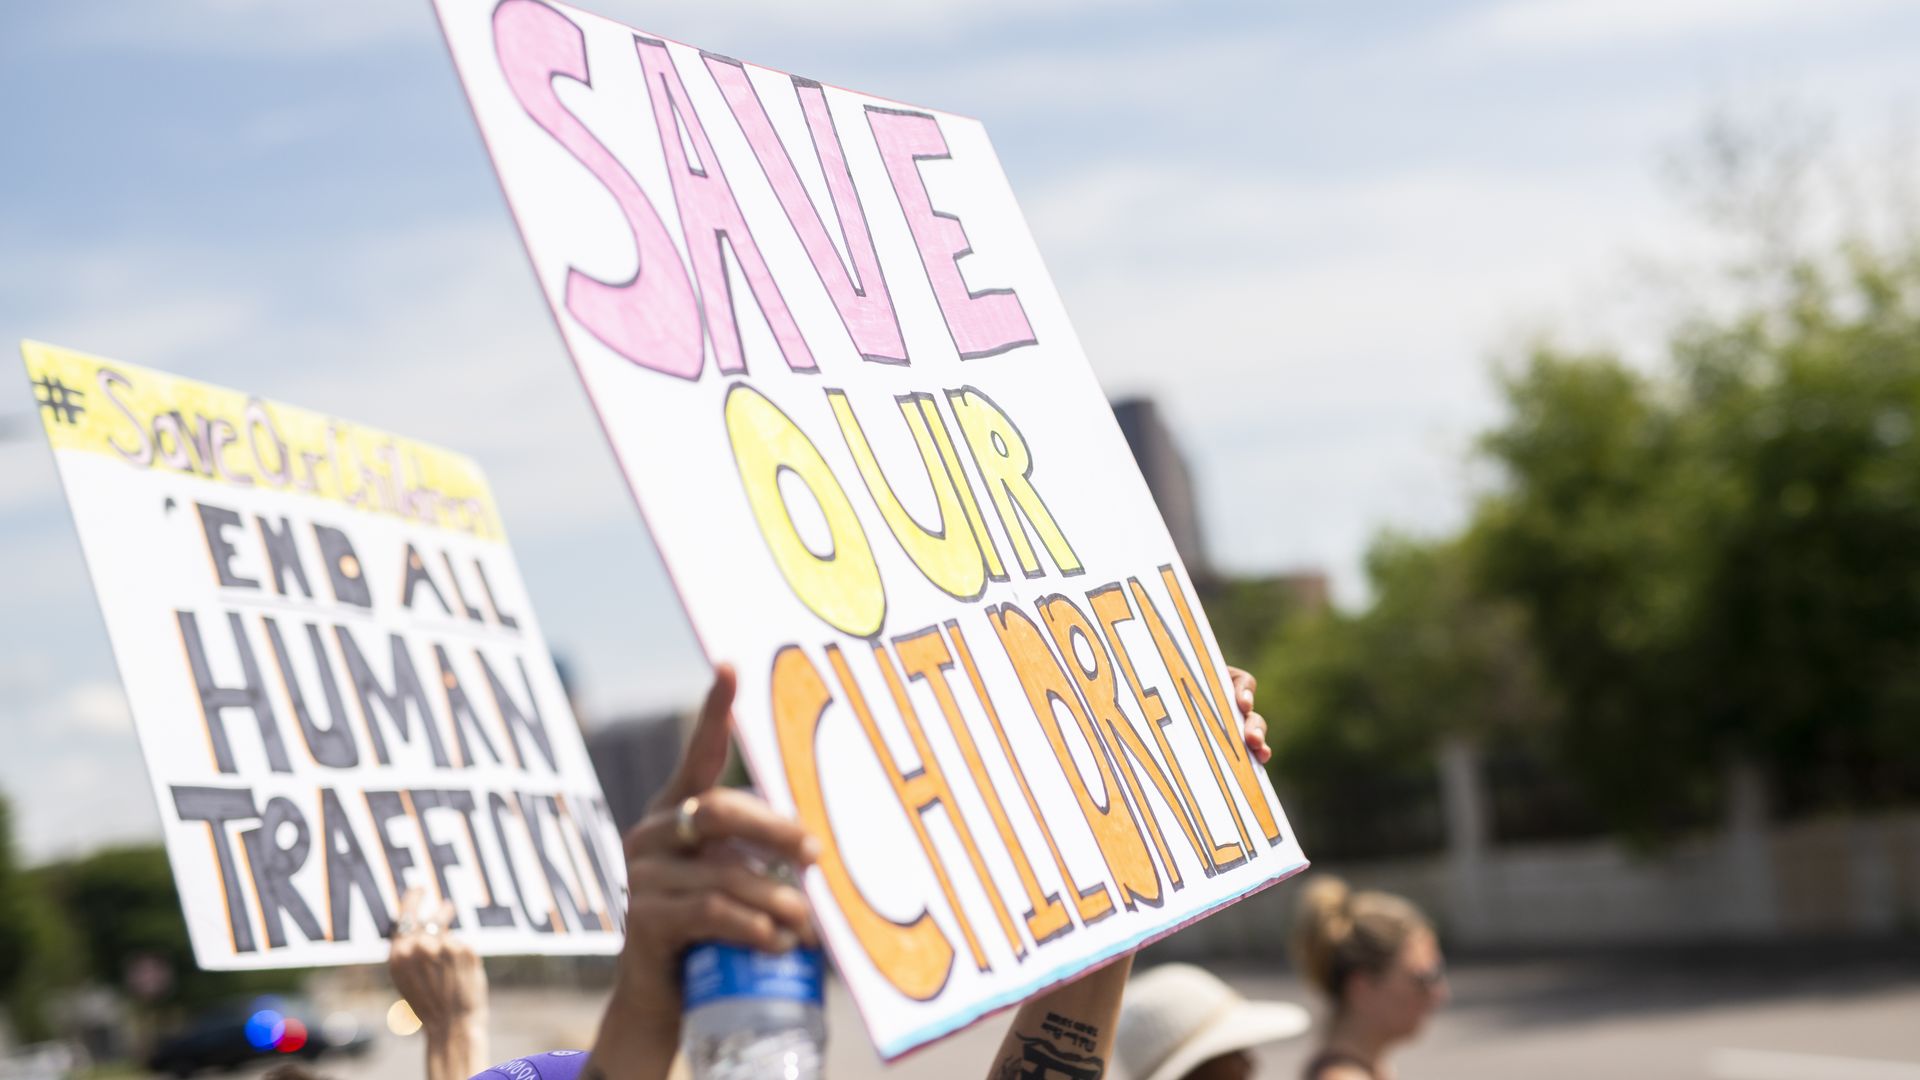 Signs at a protest read "Save our children" and "End all human trafficking." 